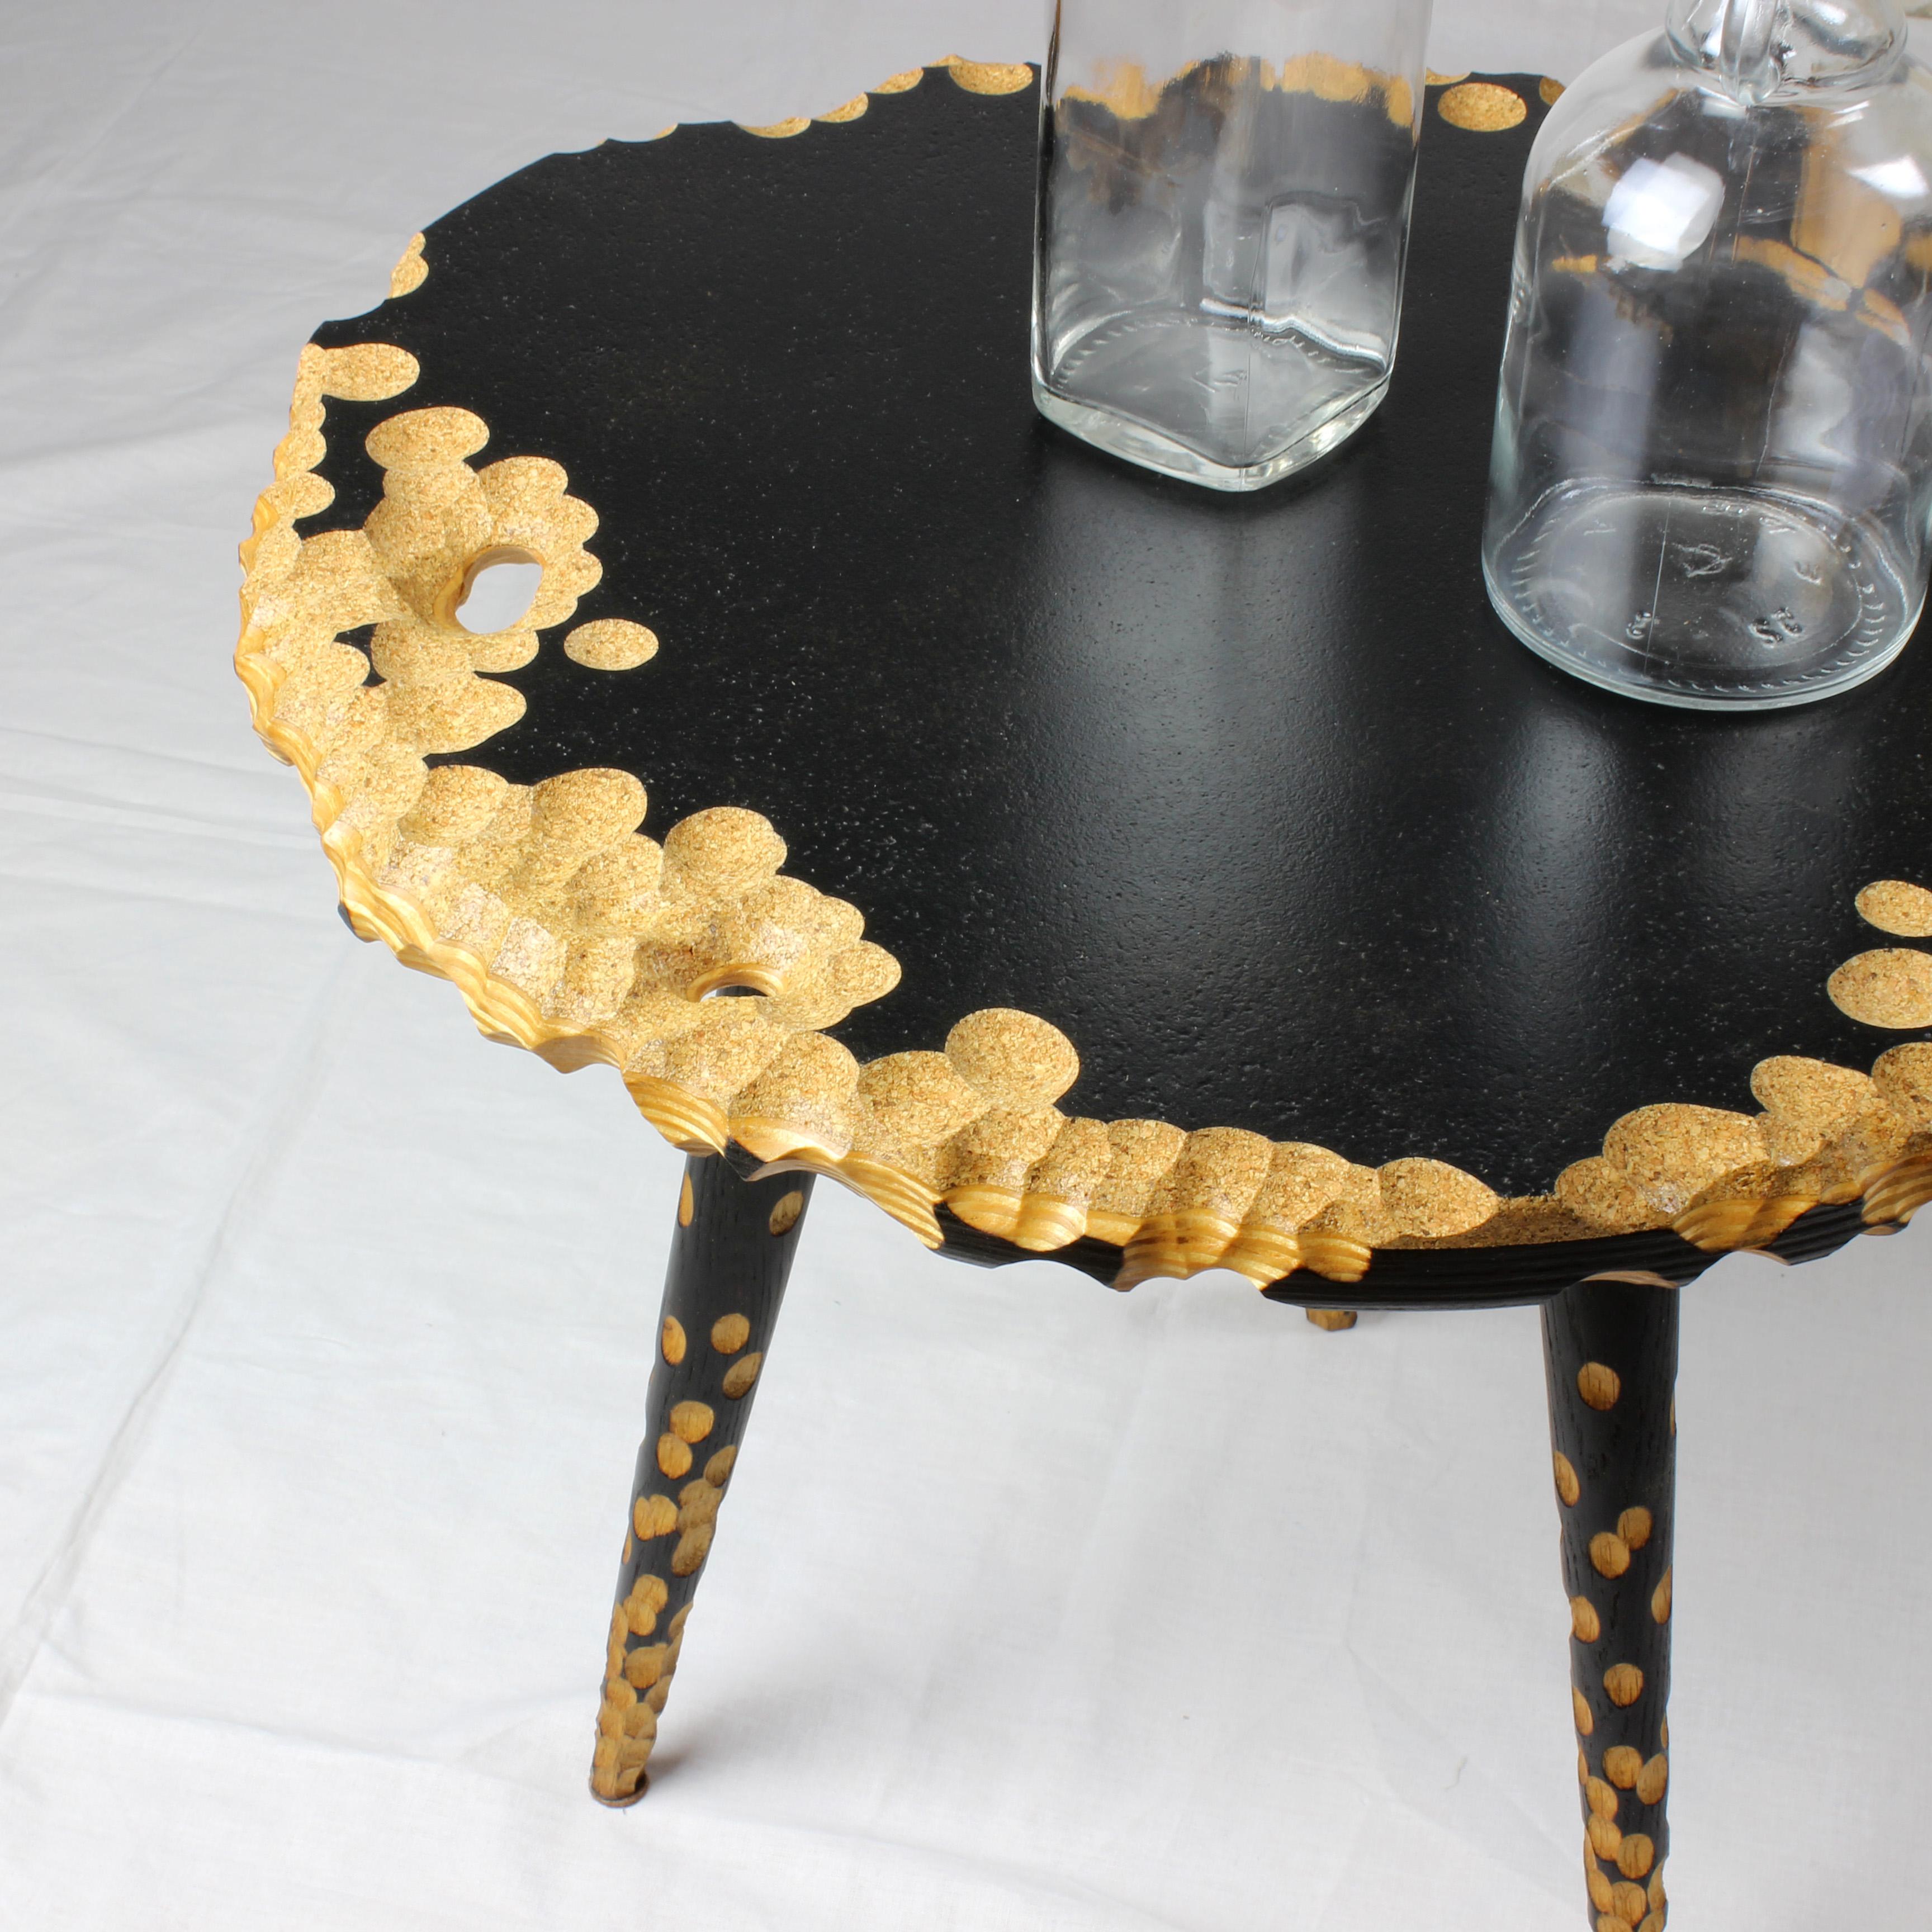 Blackened Moon - Side Table, Unique Sculptured Furniture, from Reclaimed Wood and Cork For Sale